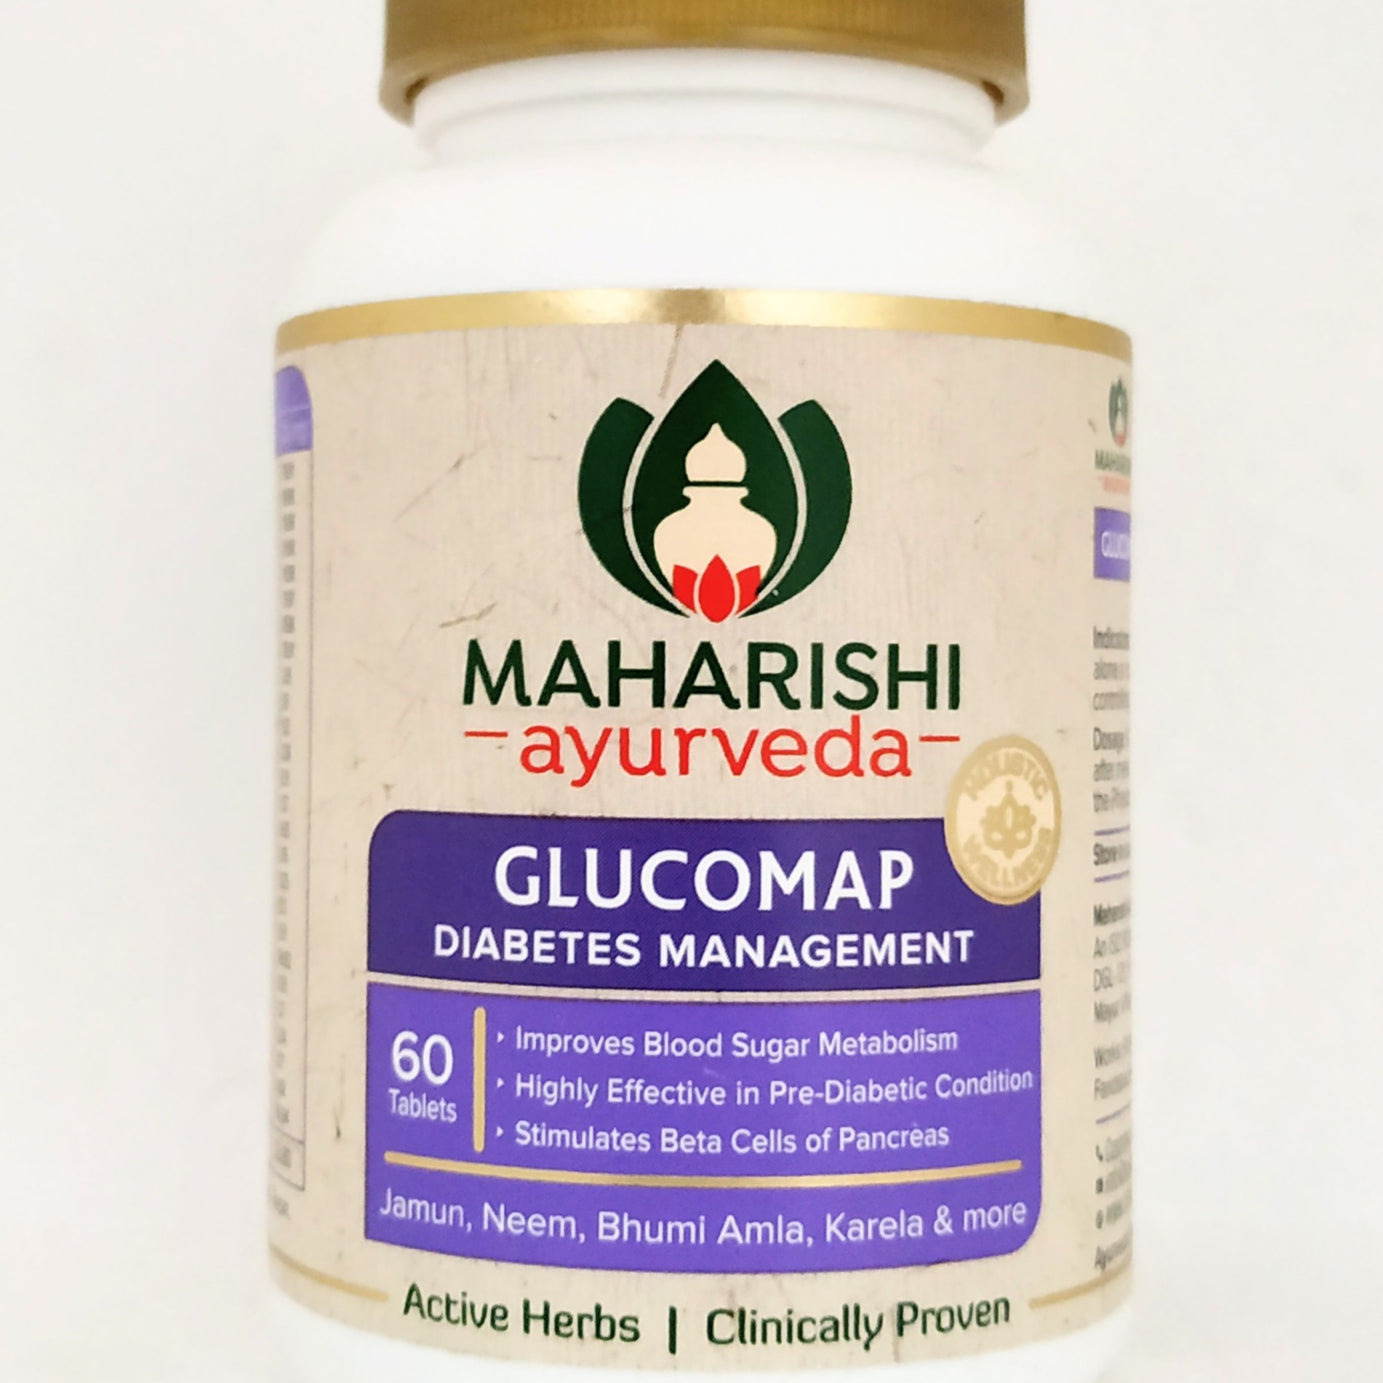 Shop Glucomap tablets - 60tablets at price 280.00 from Maharishi Ayurveda Online - Ayush Care